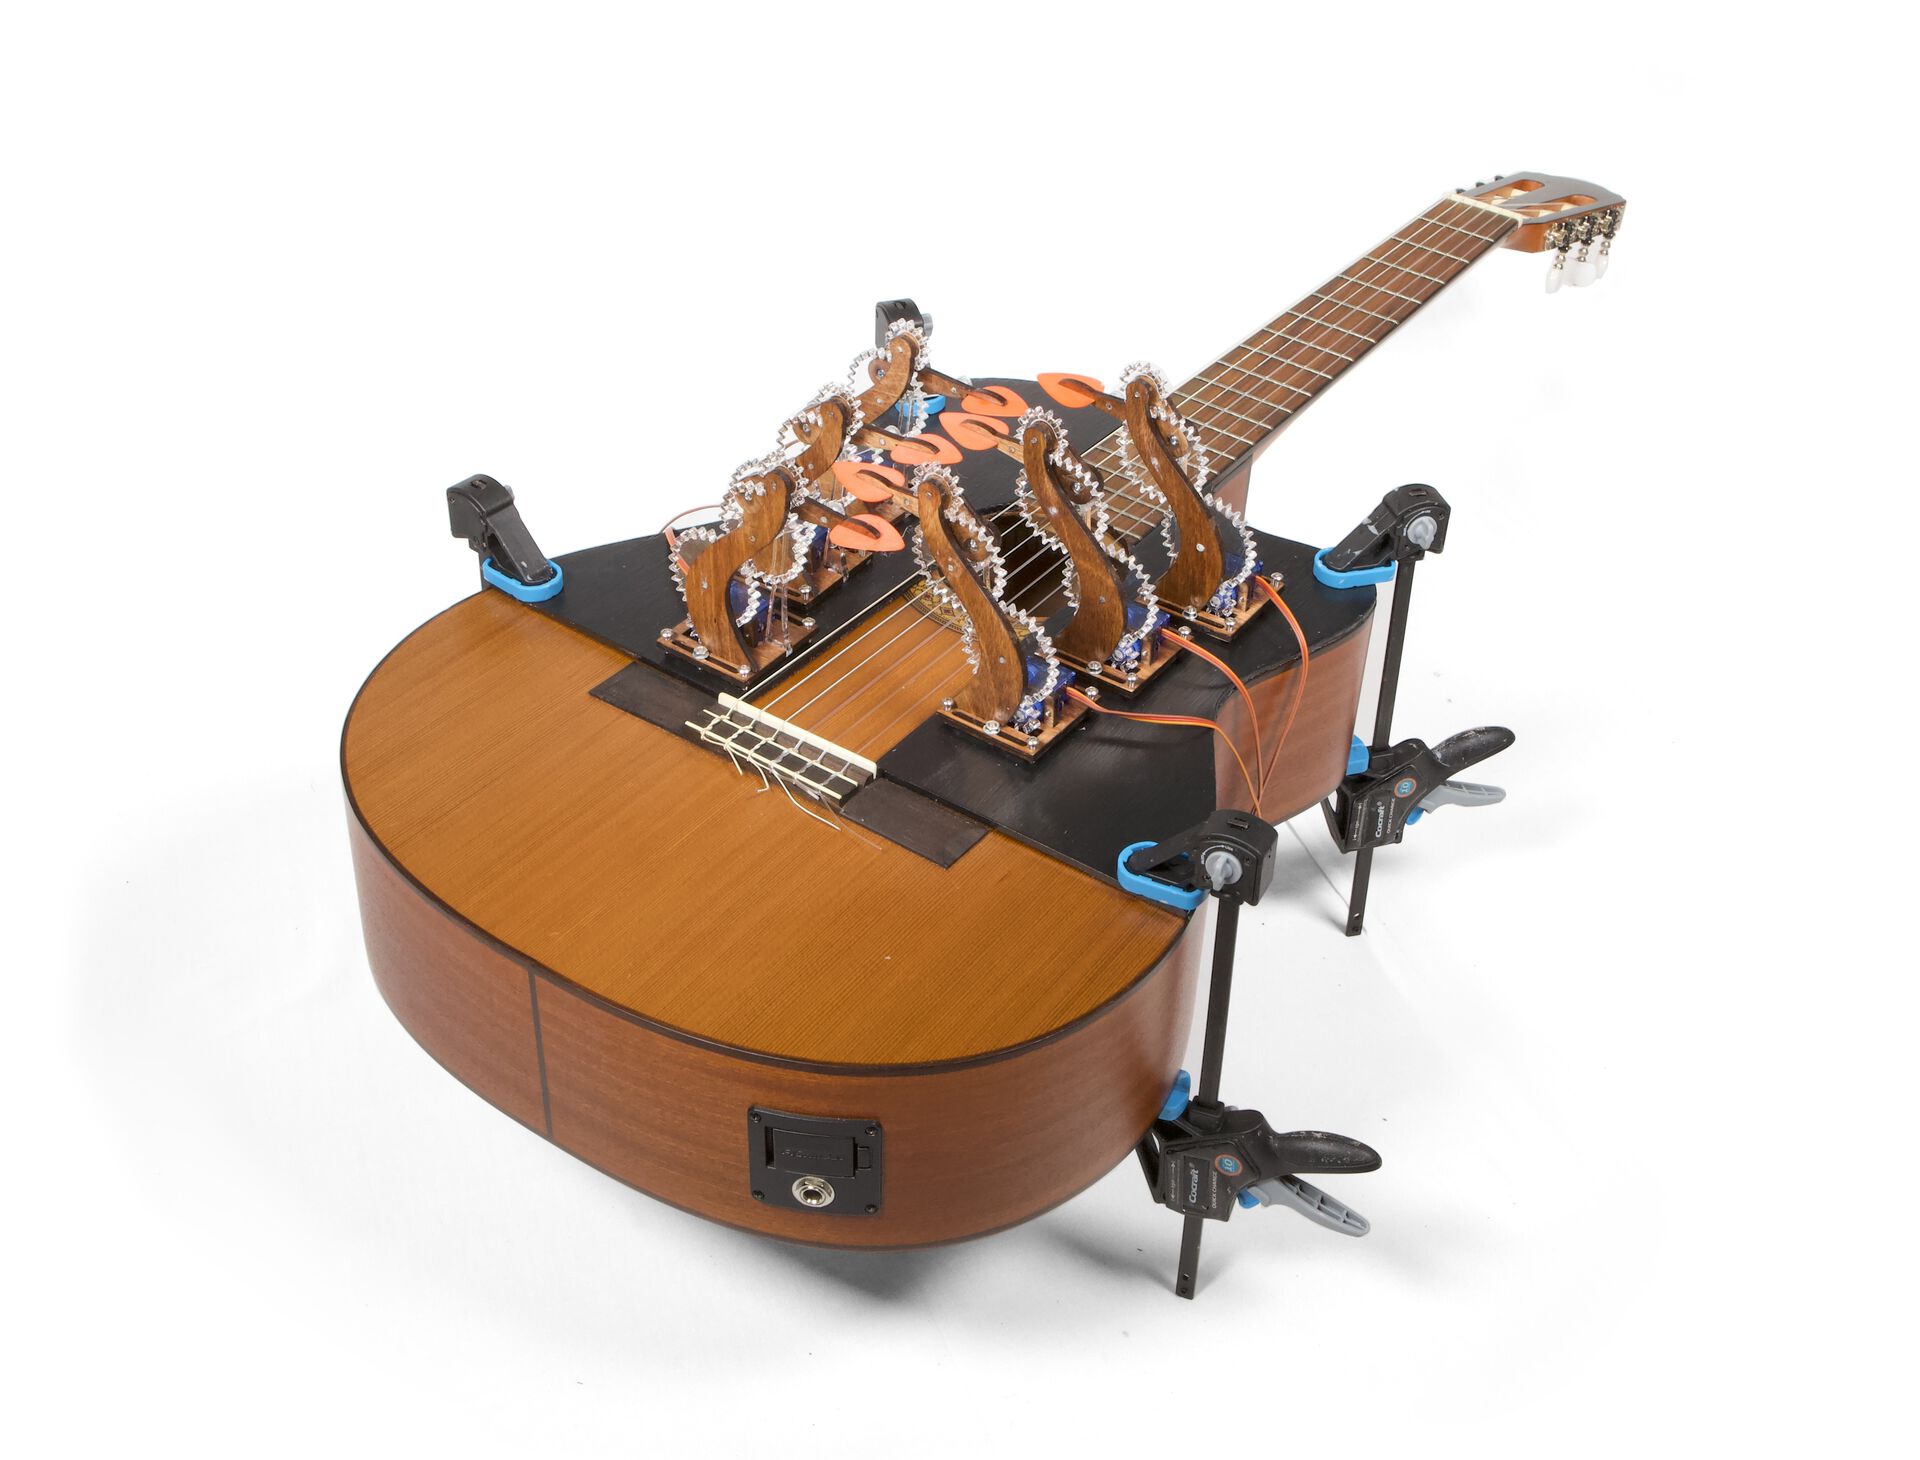 Image of a classical guitar equipped with some fancy-looking plucking mechanisms.